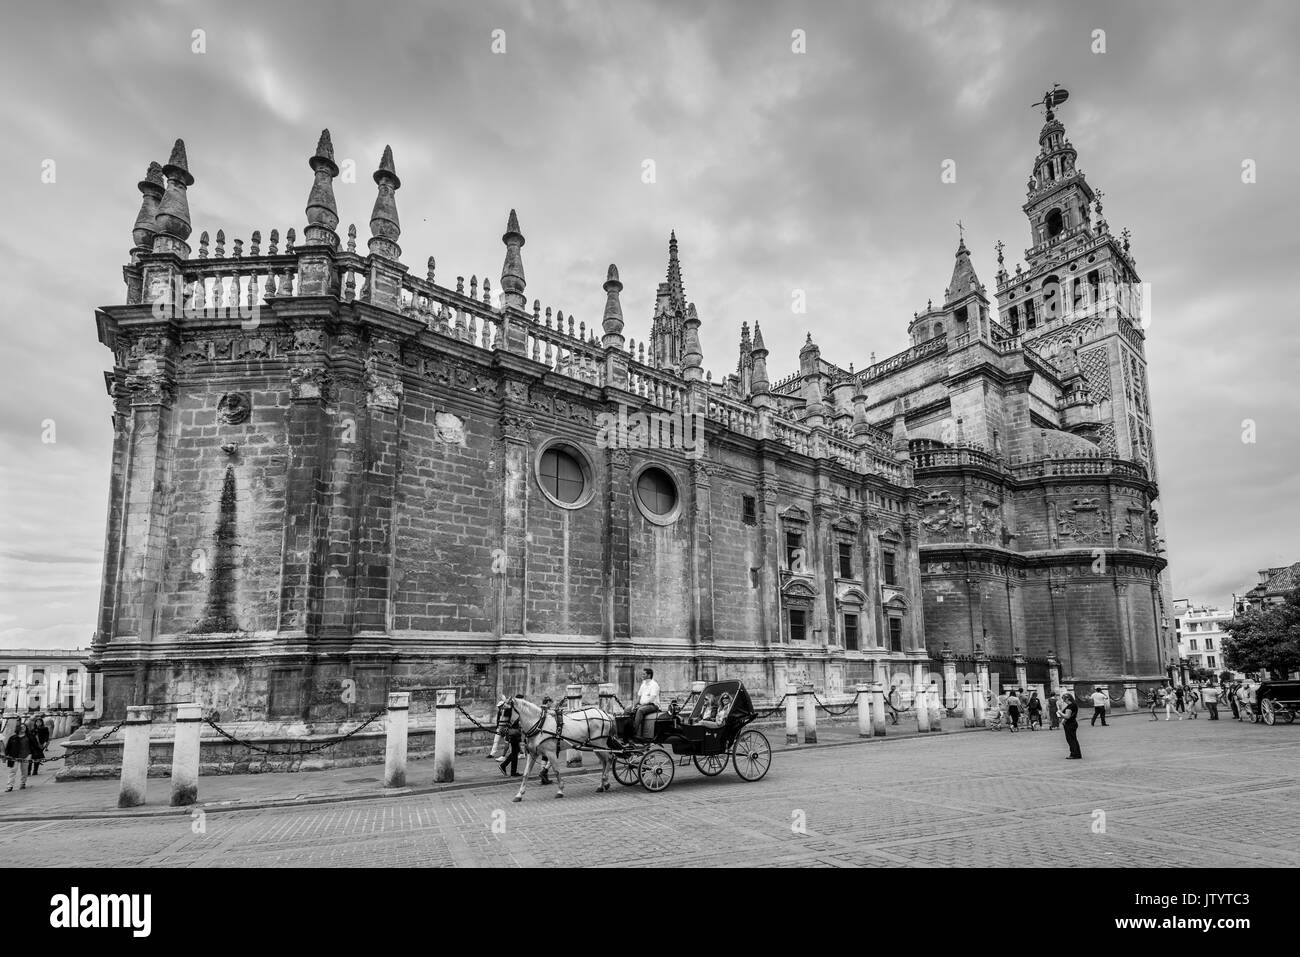 Seville, Spain - May 20, 2014: The Cathedral of Saint Mary of the See (Catedral de Santa Maria de la Sede), Gothic style architecture in Spain, Andalu Stock Photo